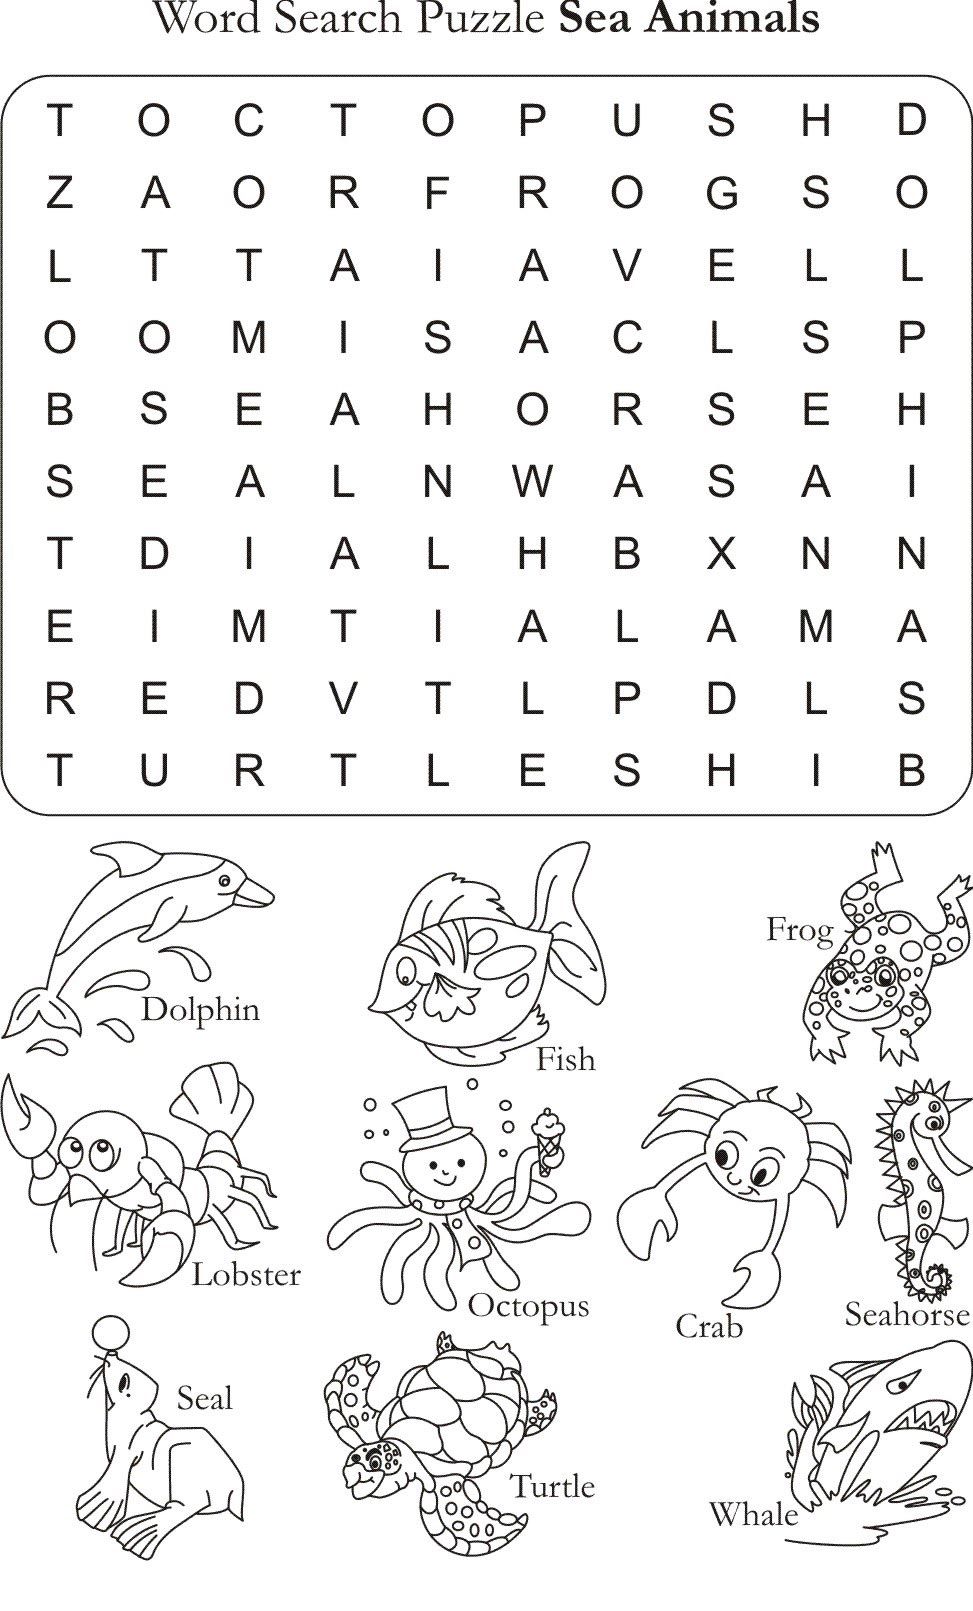 Word search puzzle sea animals download free word search puzzle sea animals for kids word puzzles for kids english worksheets for kids worksheets for kids